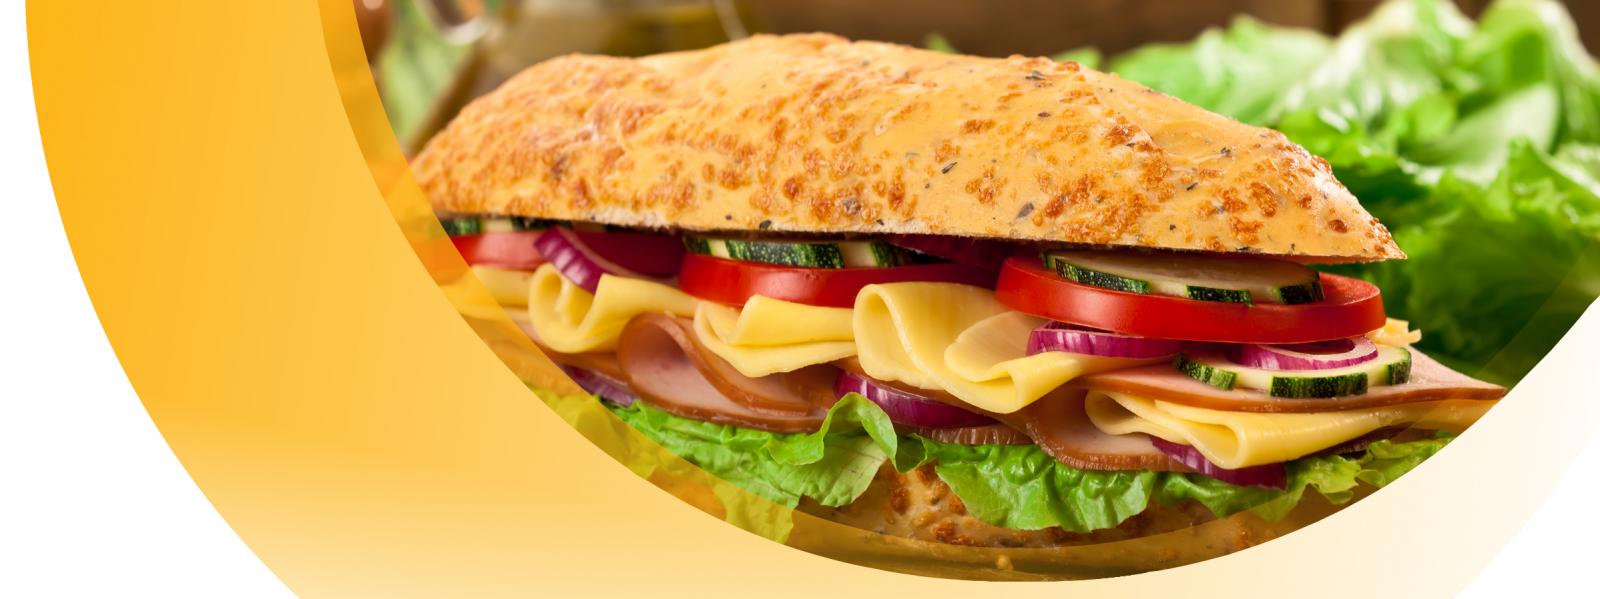 Image of a sandwich woth cheddmax EV